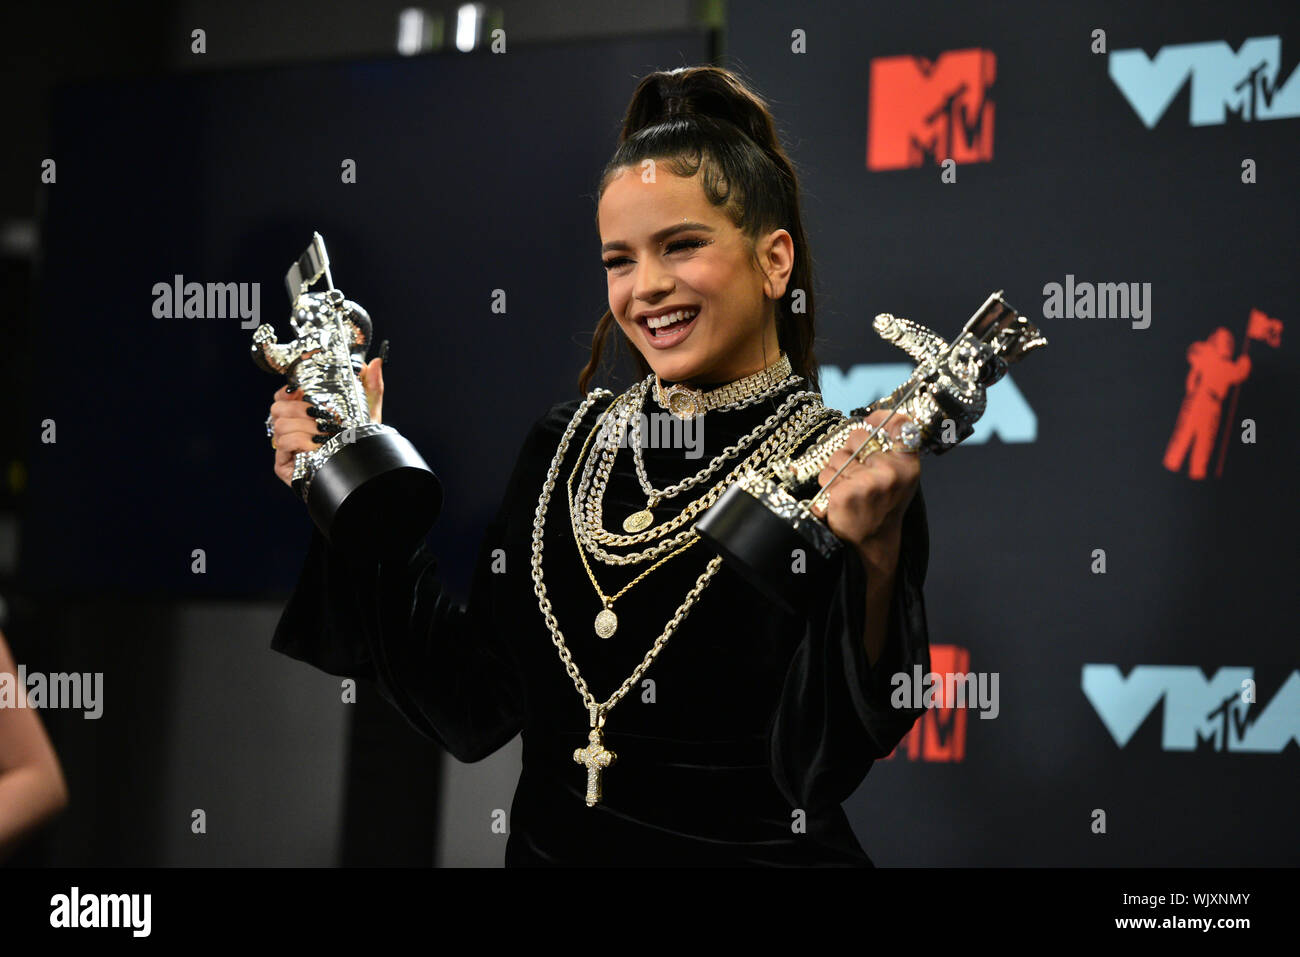 Rosalía attends the 2019 MTV Video Music Awards at Prudential Center on August 26, 2019 in Newark, New Jersey. Stock Photo